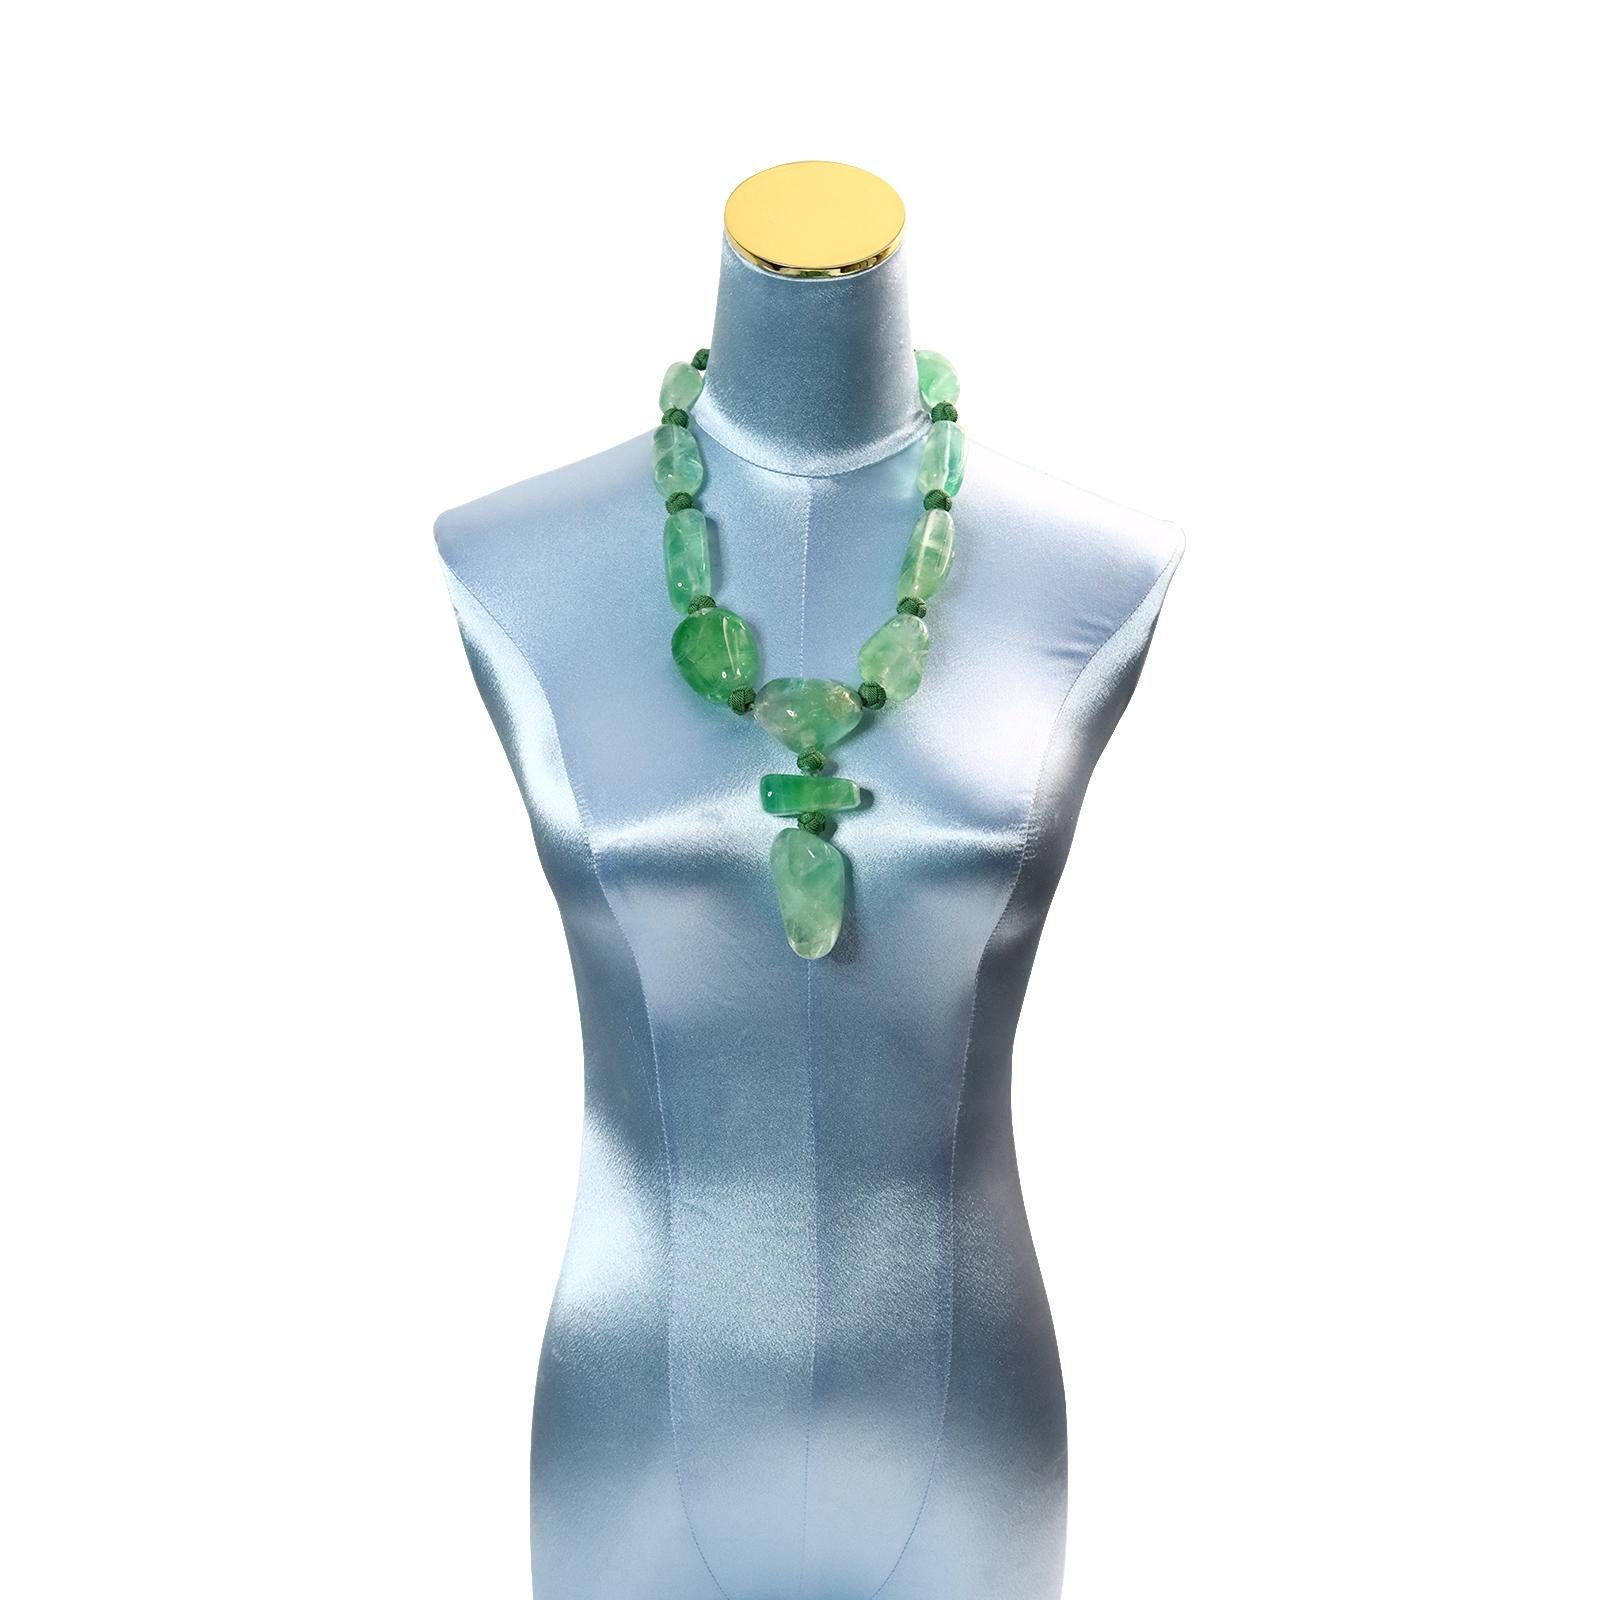 Vintage Green Polished Quartz on Silk Knotted Cord Necklace. Magnificient Piece. The necklace piece is 24